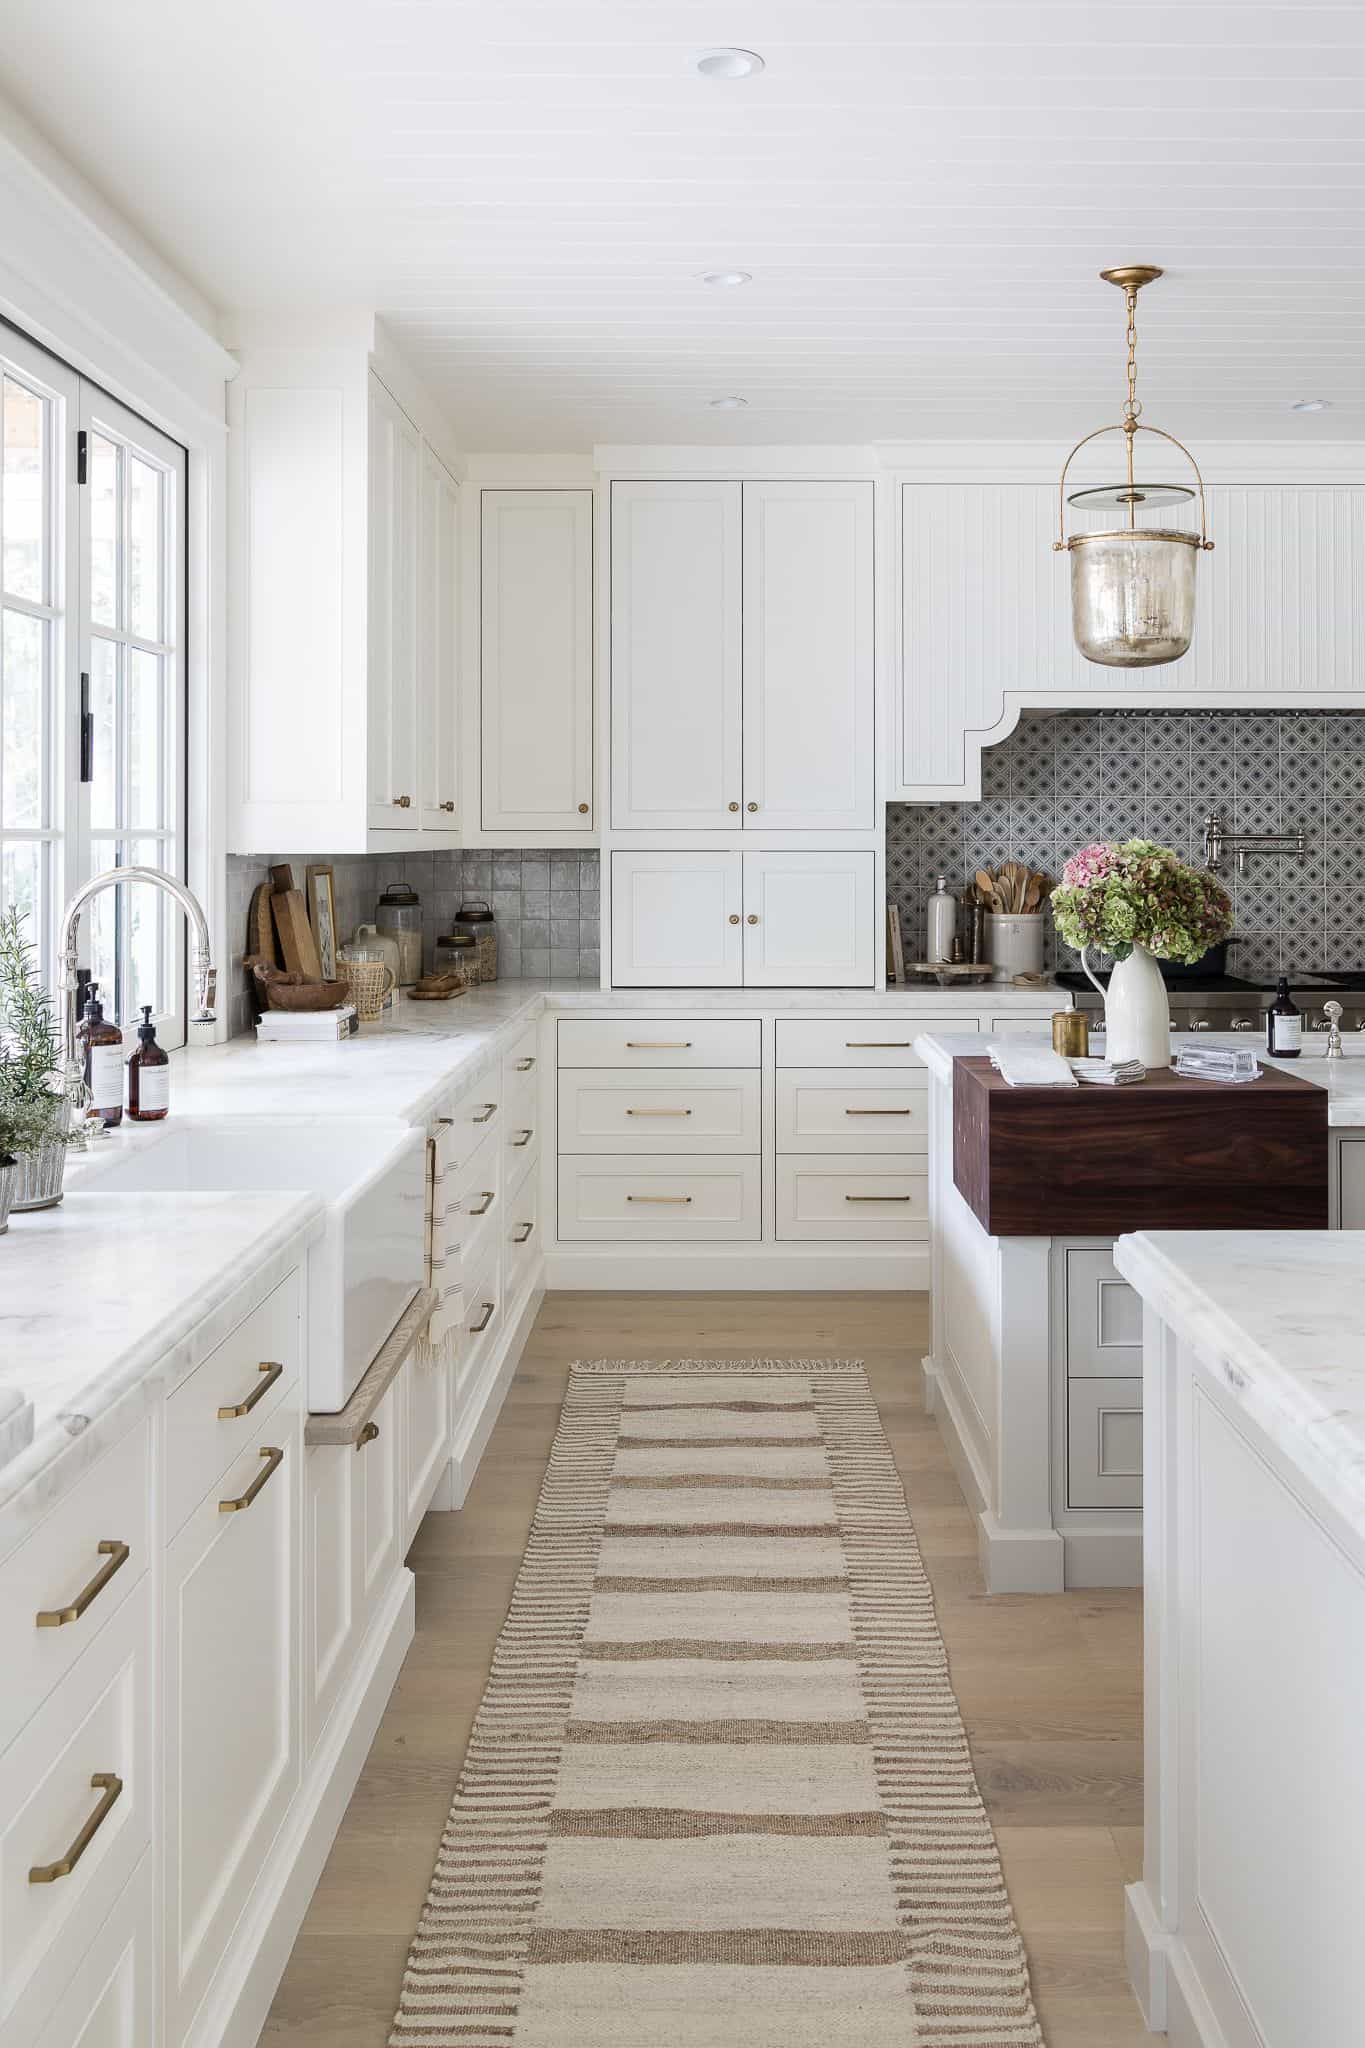 Home Reveal: Nellie Gail Kitchen - Mindy Gayer Design Co.